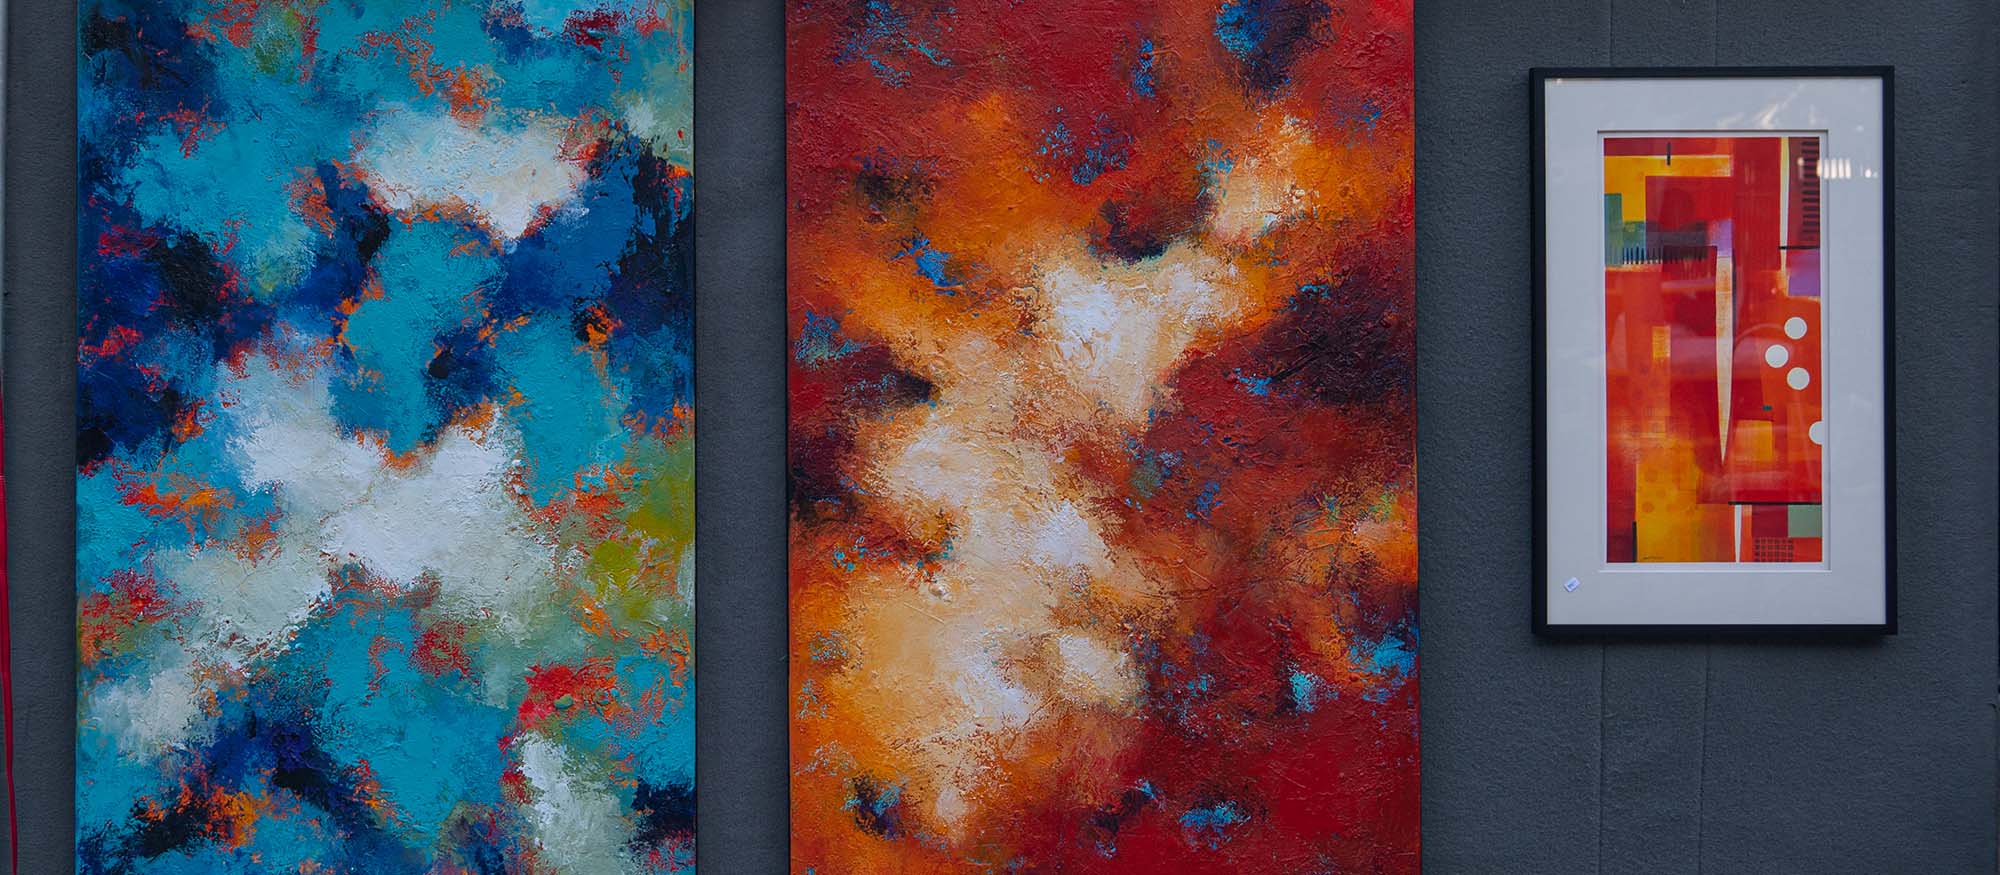 A picture of one of the booths at the art festival, with two large canvases of abstract art (one blue and one orange/red) along with a smaller framed piece of abstract art.